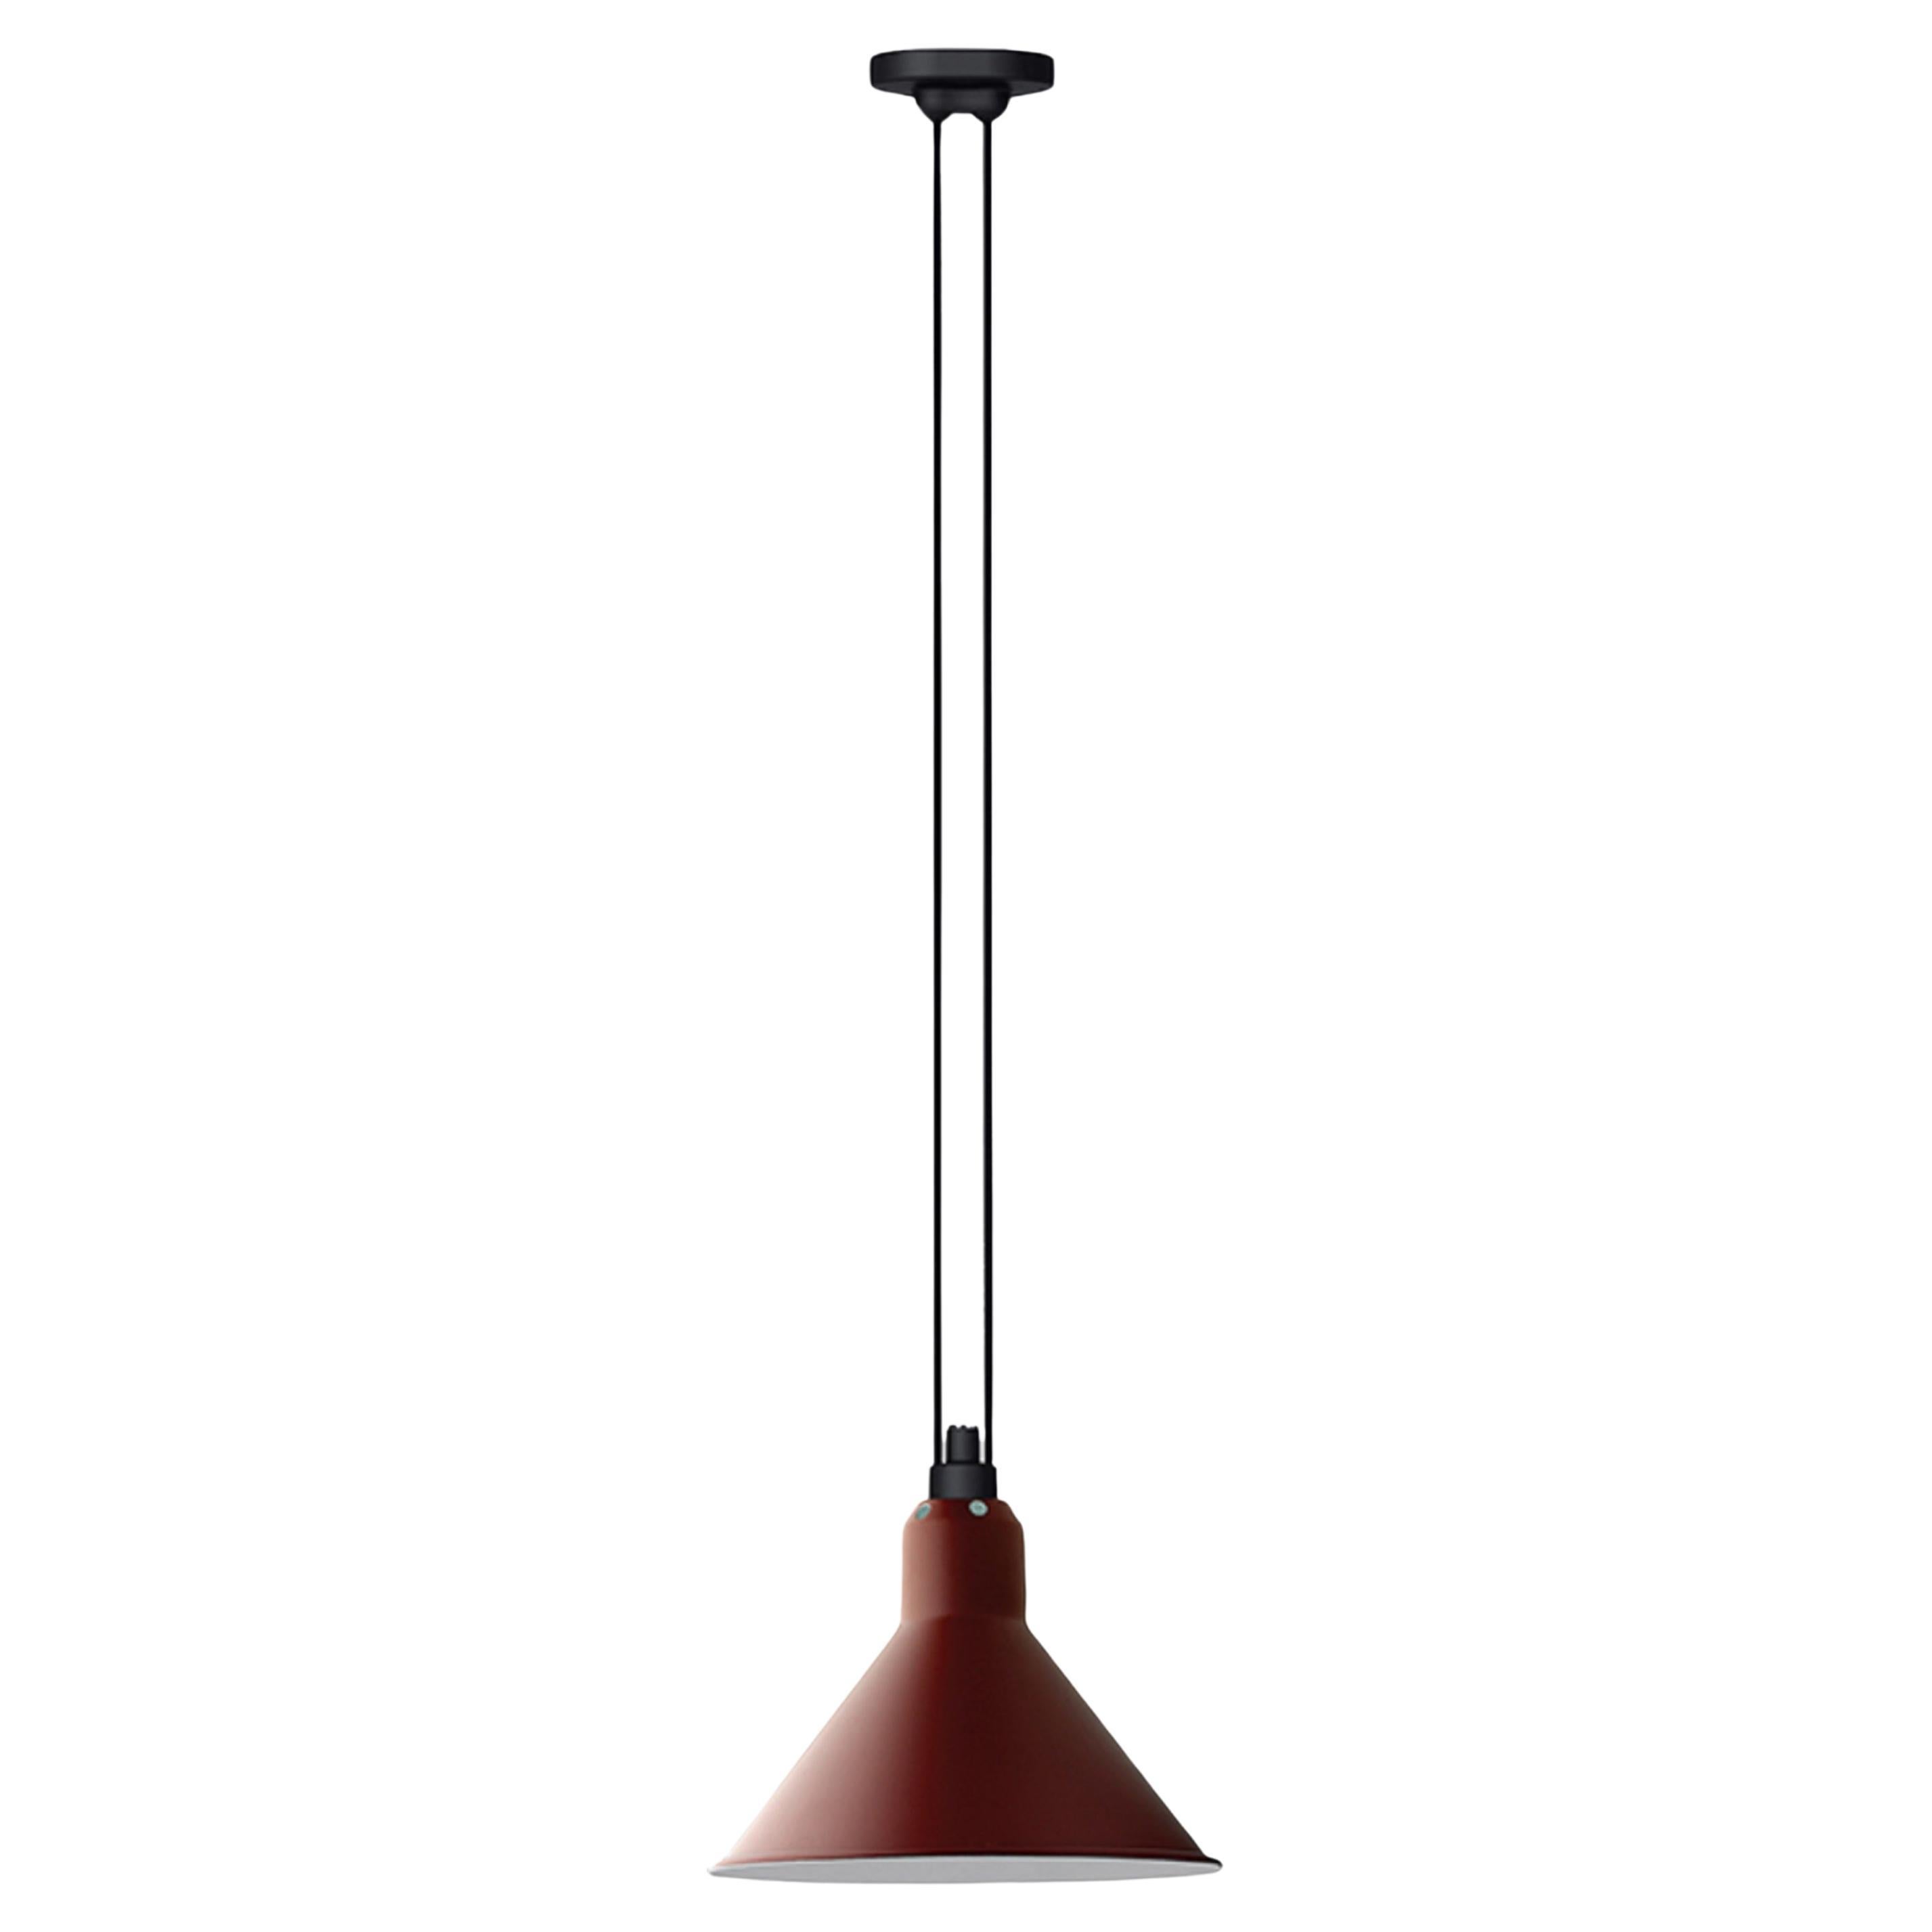 DCW Editions Les Acrobates N°322 Large Conic Pendant Lamp in Red Shade